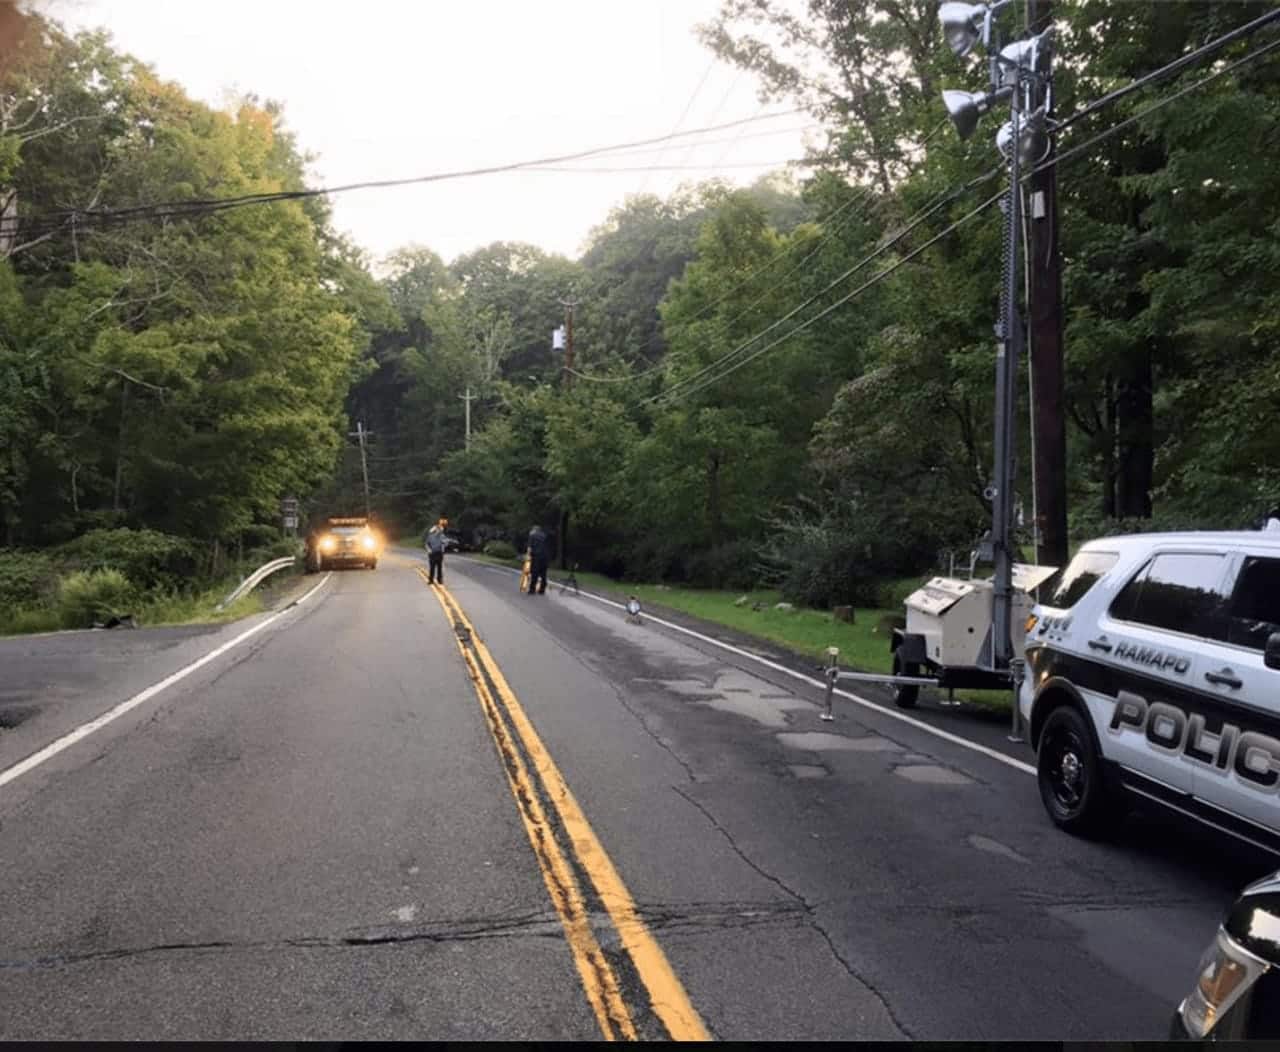 Route 202 near the intersection of Wilder Road was closed until about 9 a.m. Thursday as the investigation continued.